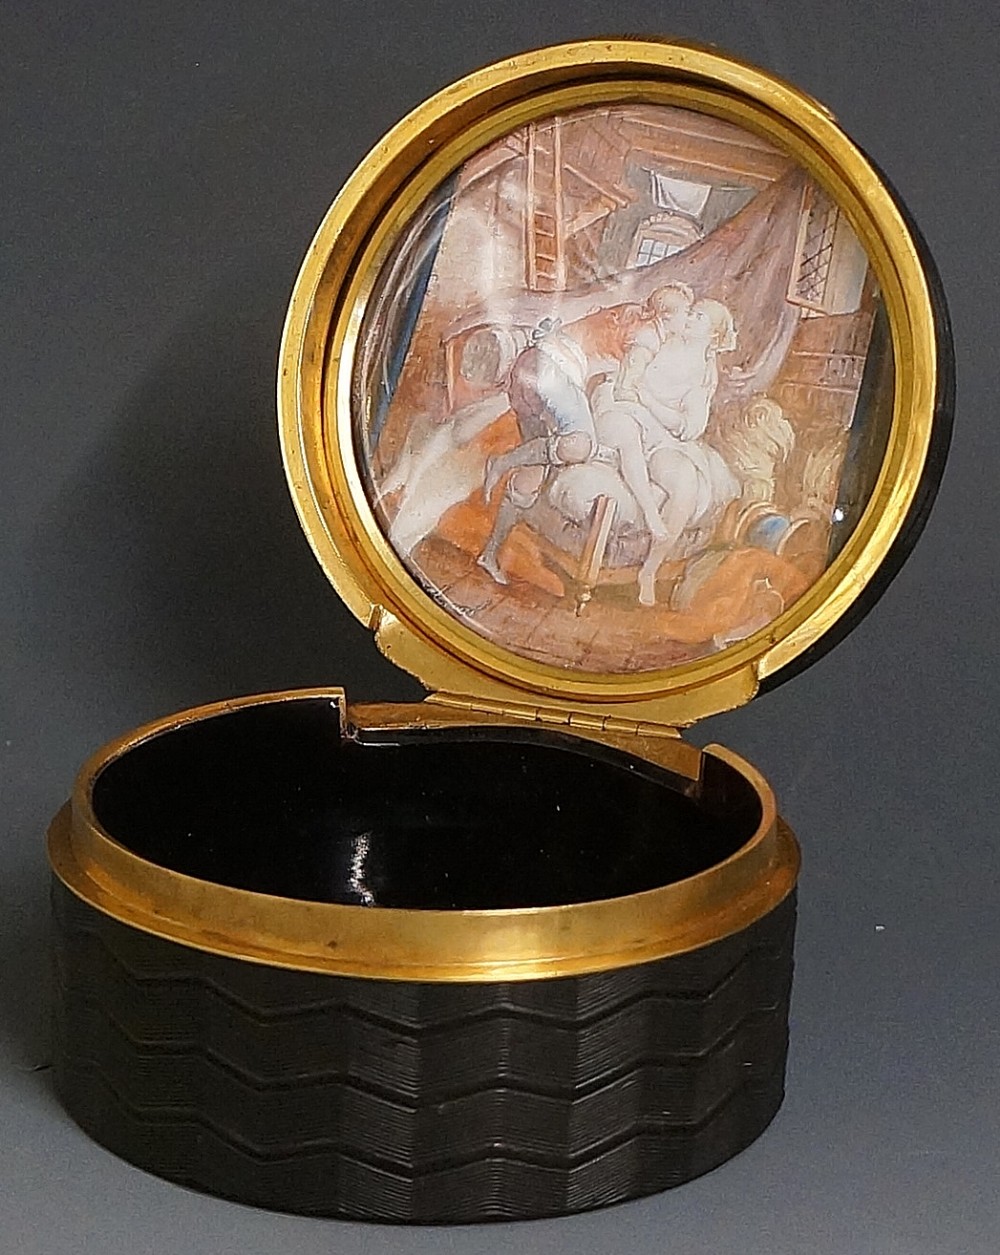 A fine early 19th Century engine turned tortoiseshell circular box the hinged lid with gilt metal